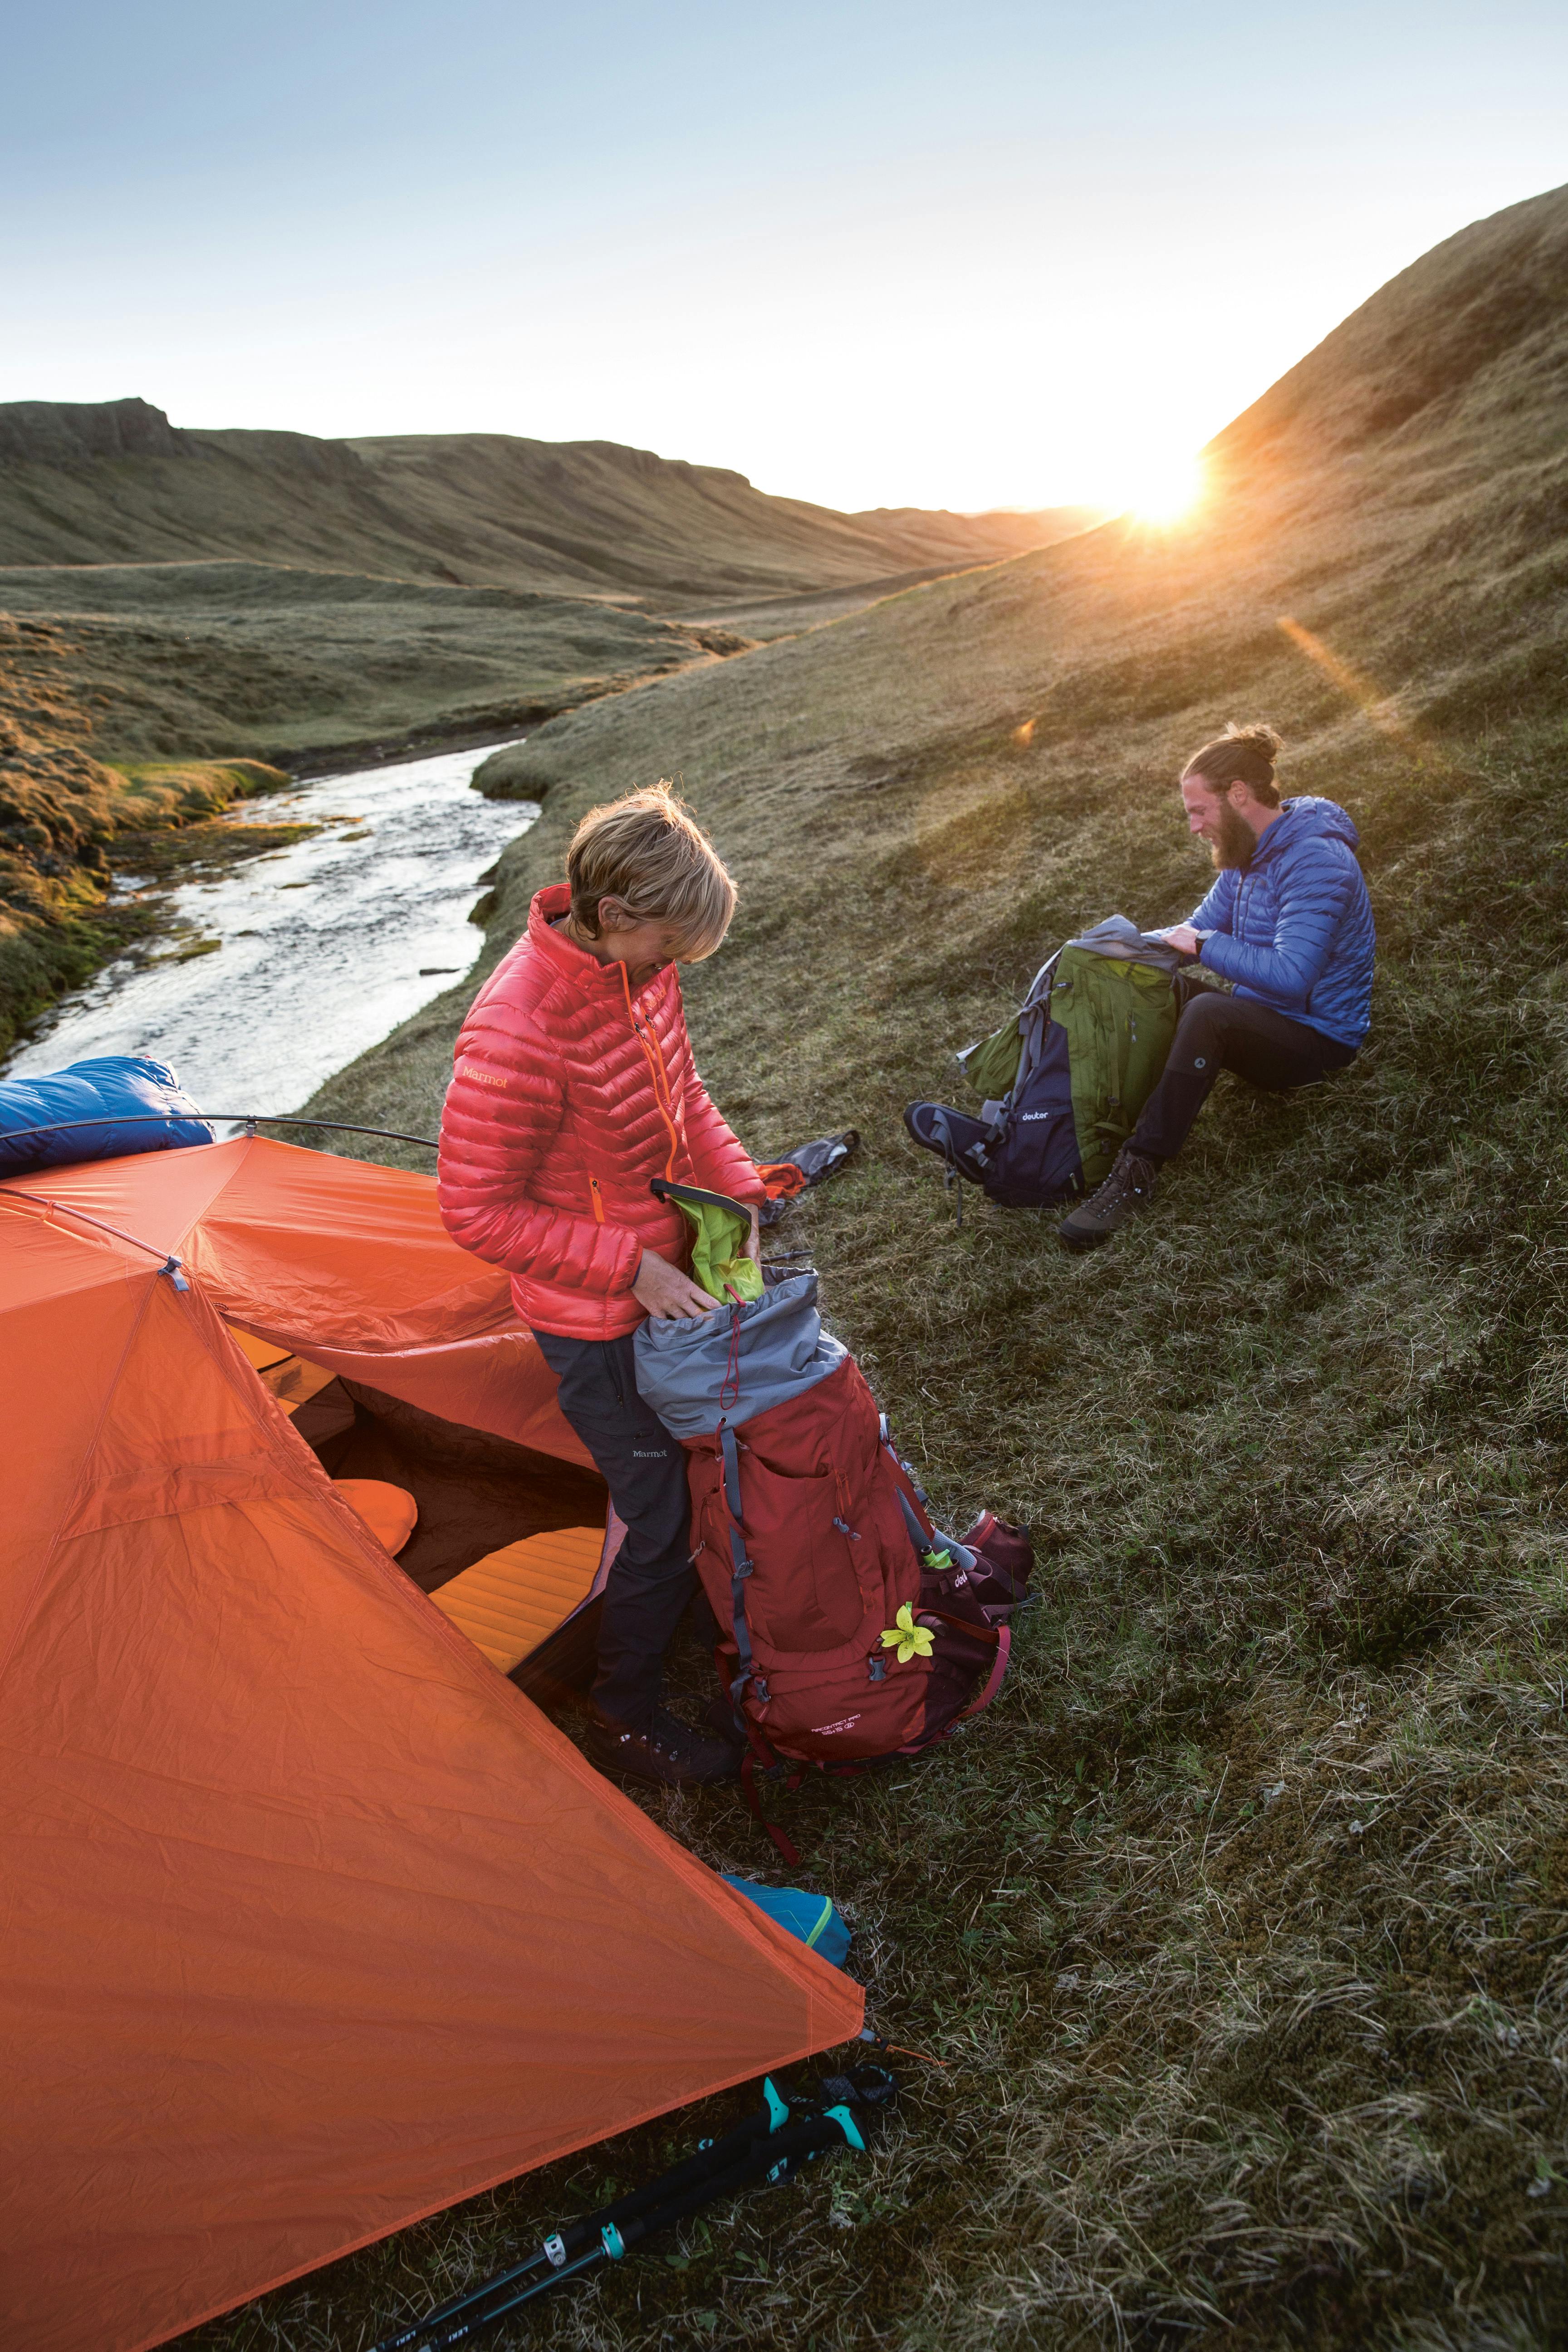 Two campers unloading their backpacks by an orange tent at their campsite by a stream winding through rolling grassy hills at sunset